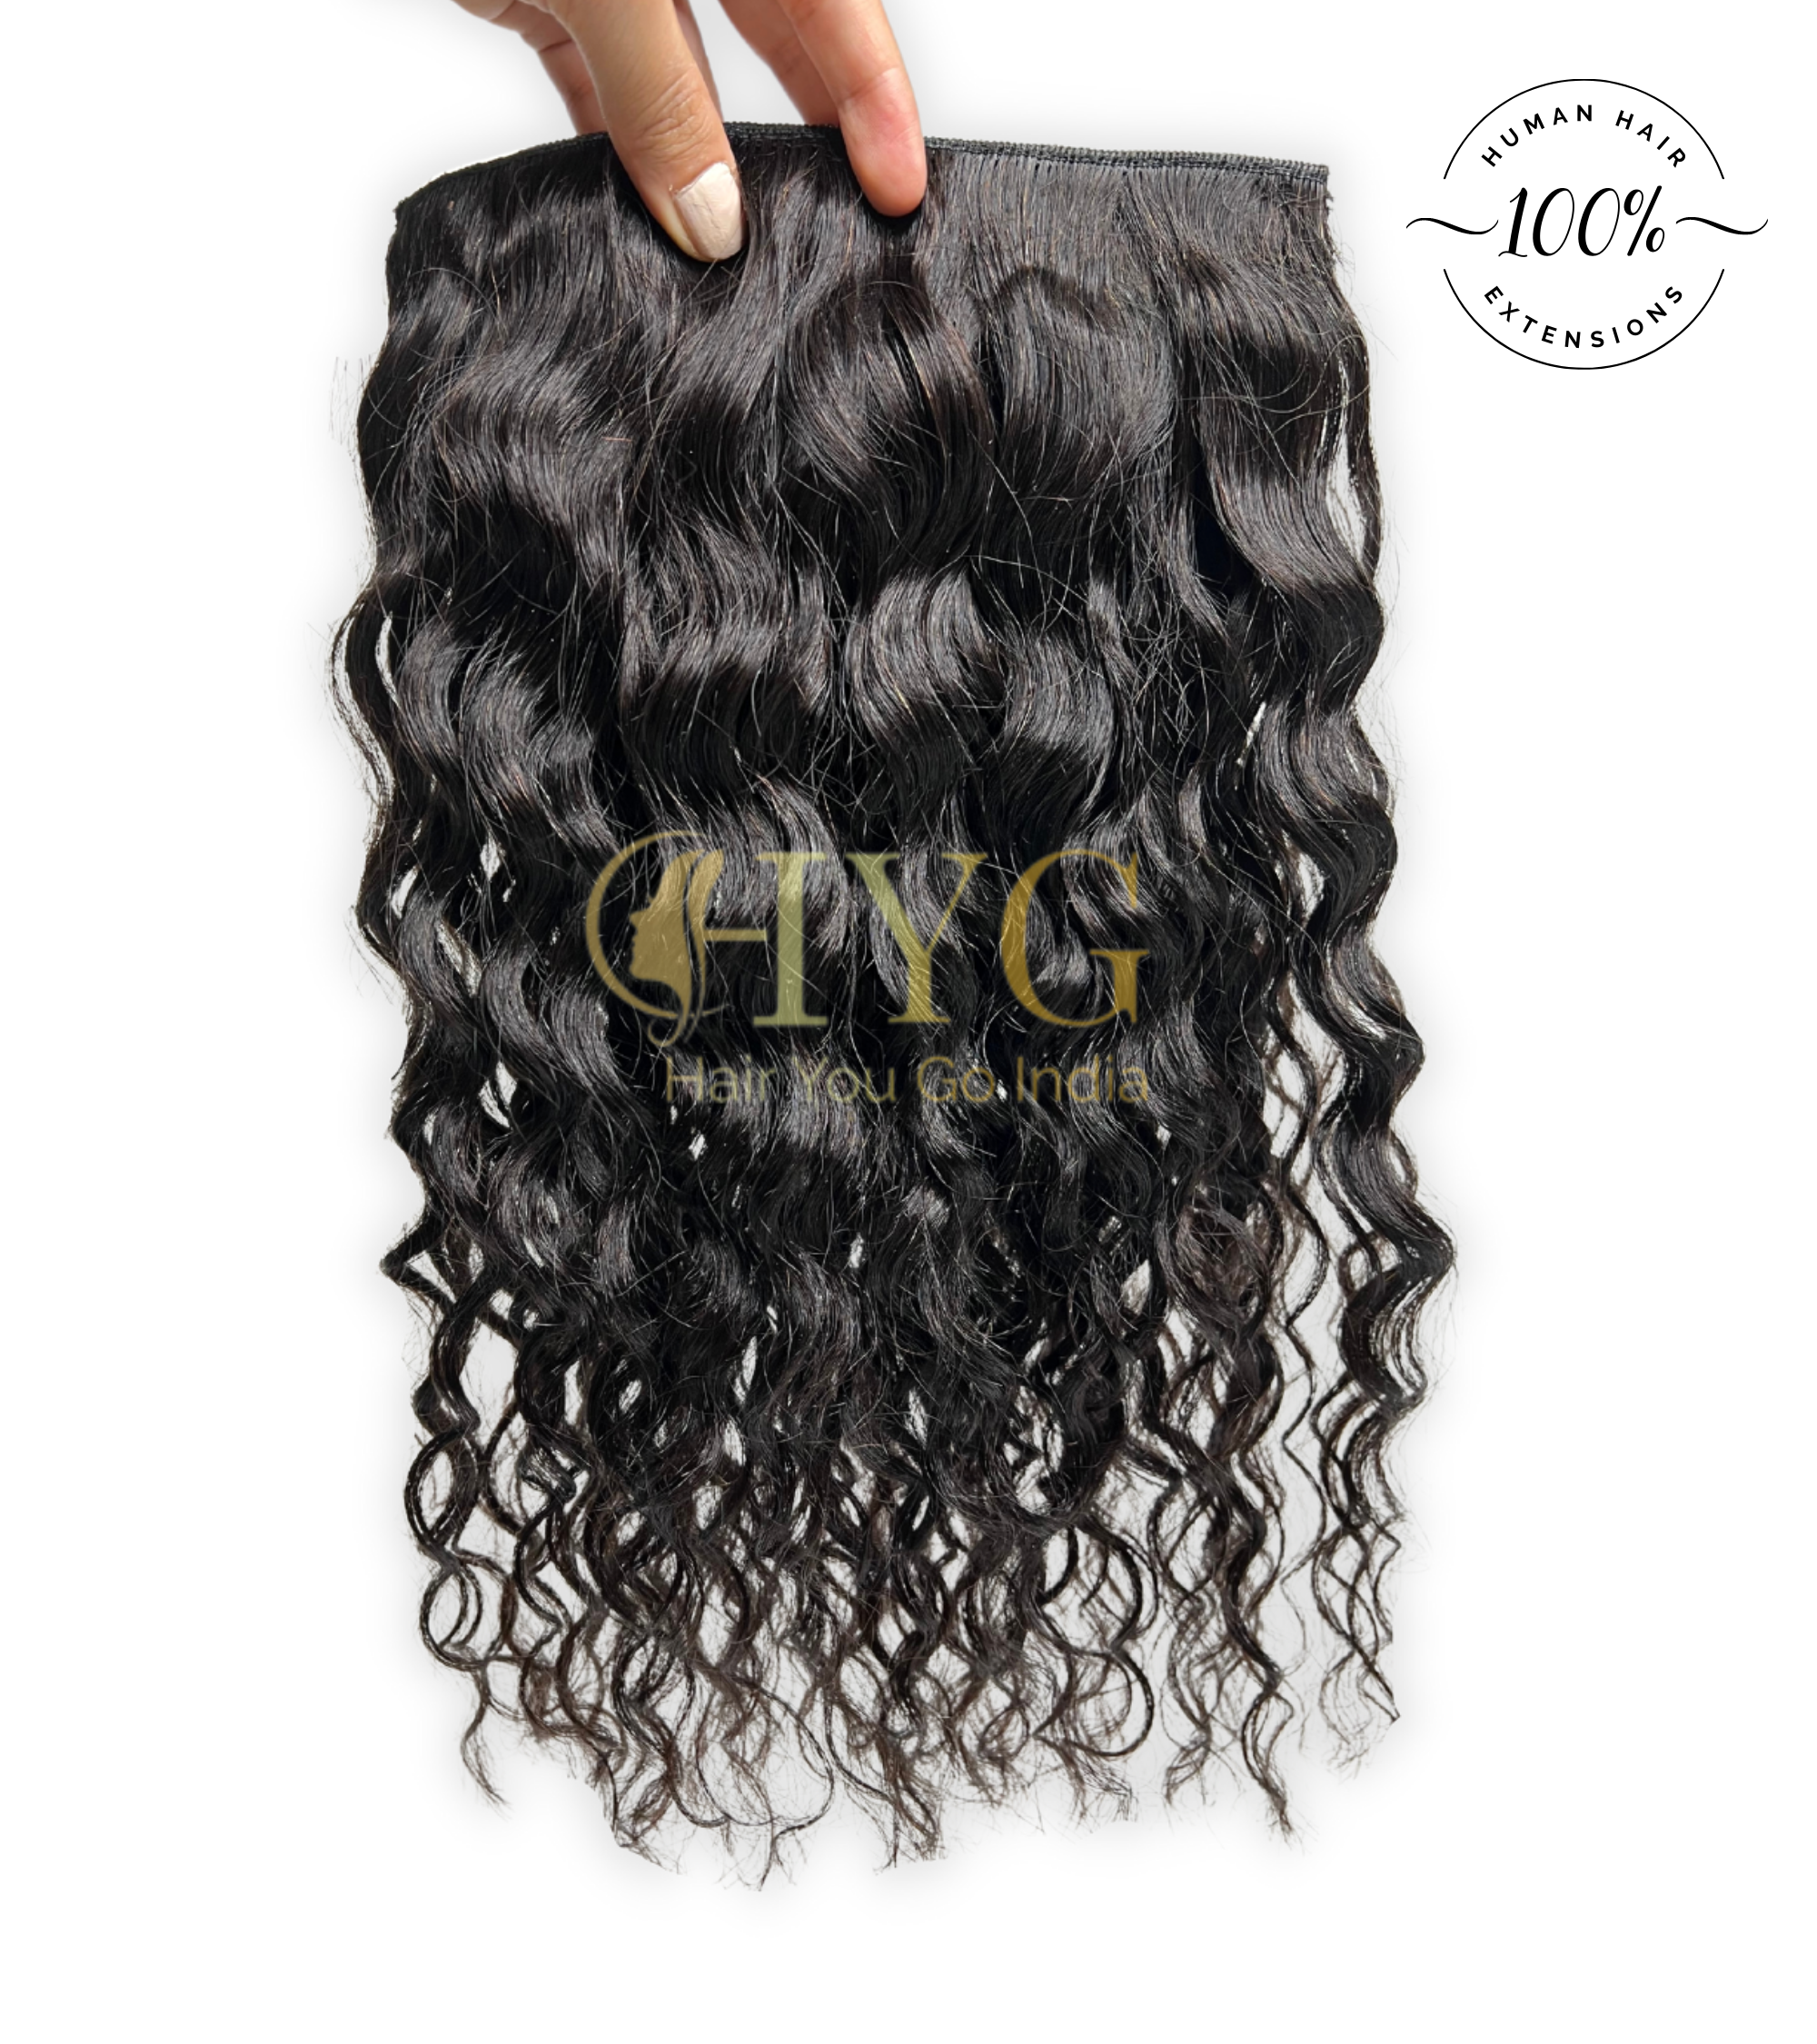 Curly Hair Volumizers (Set of 3)